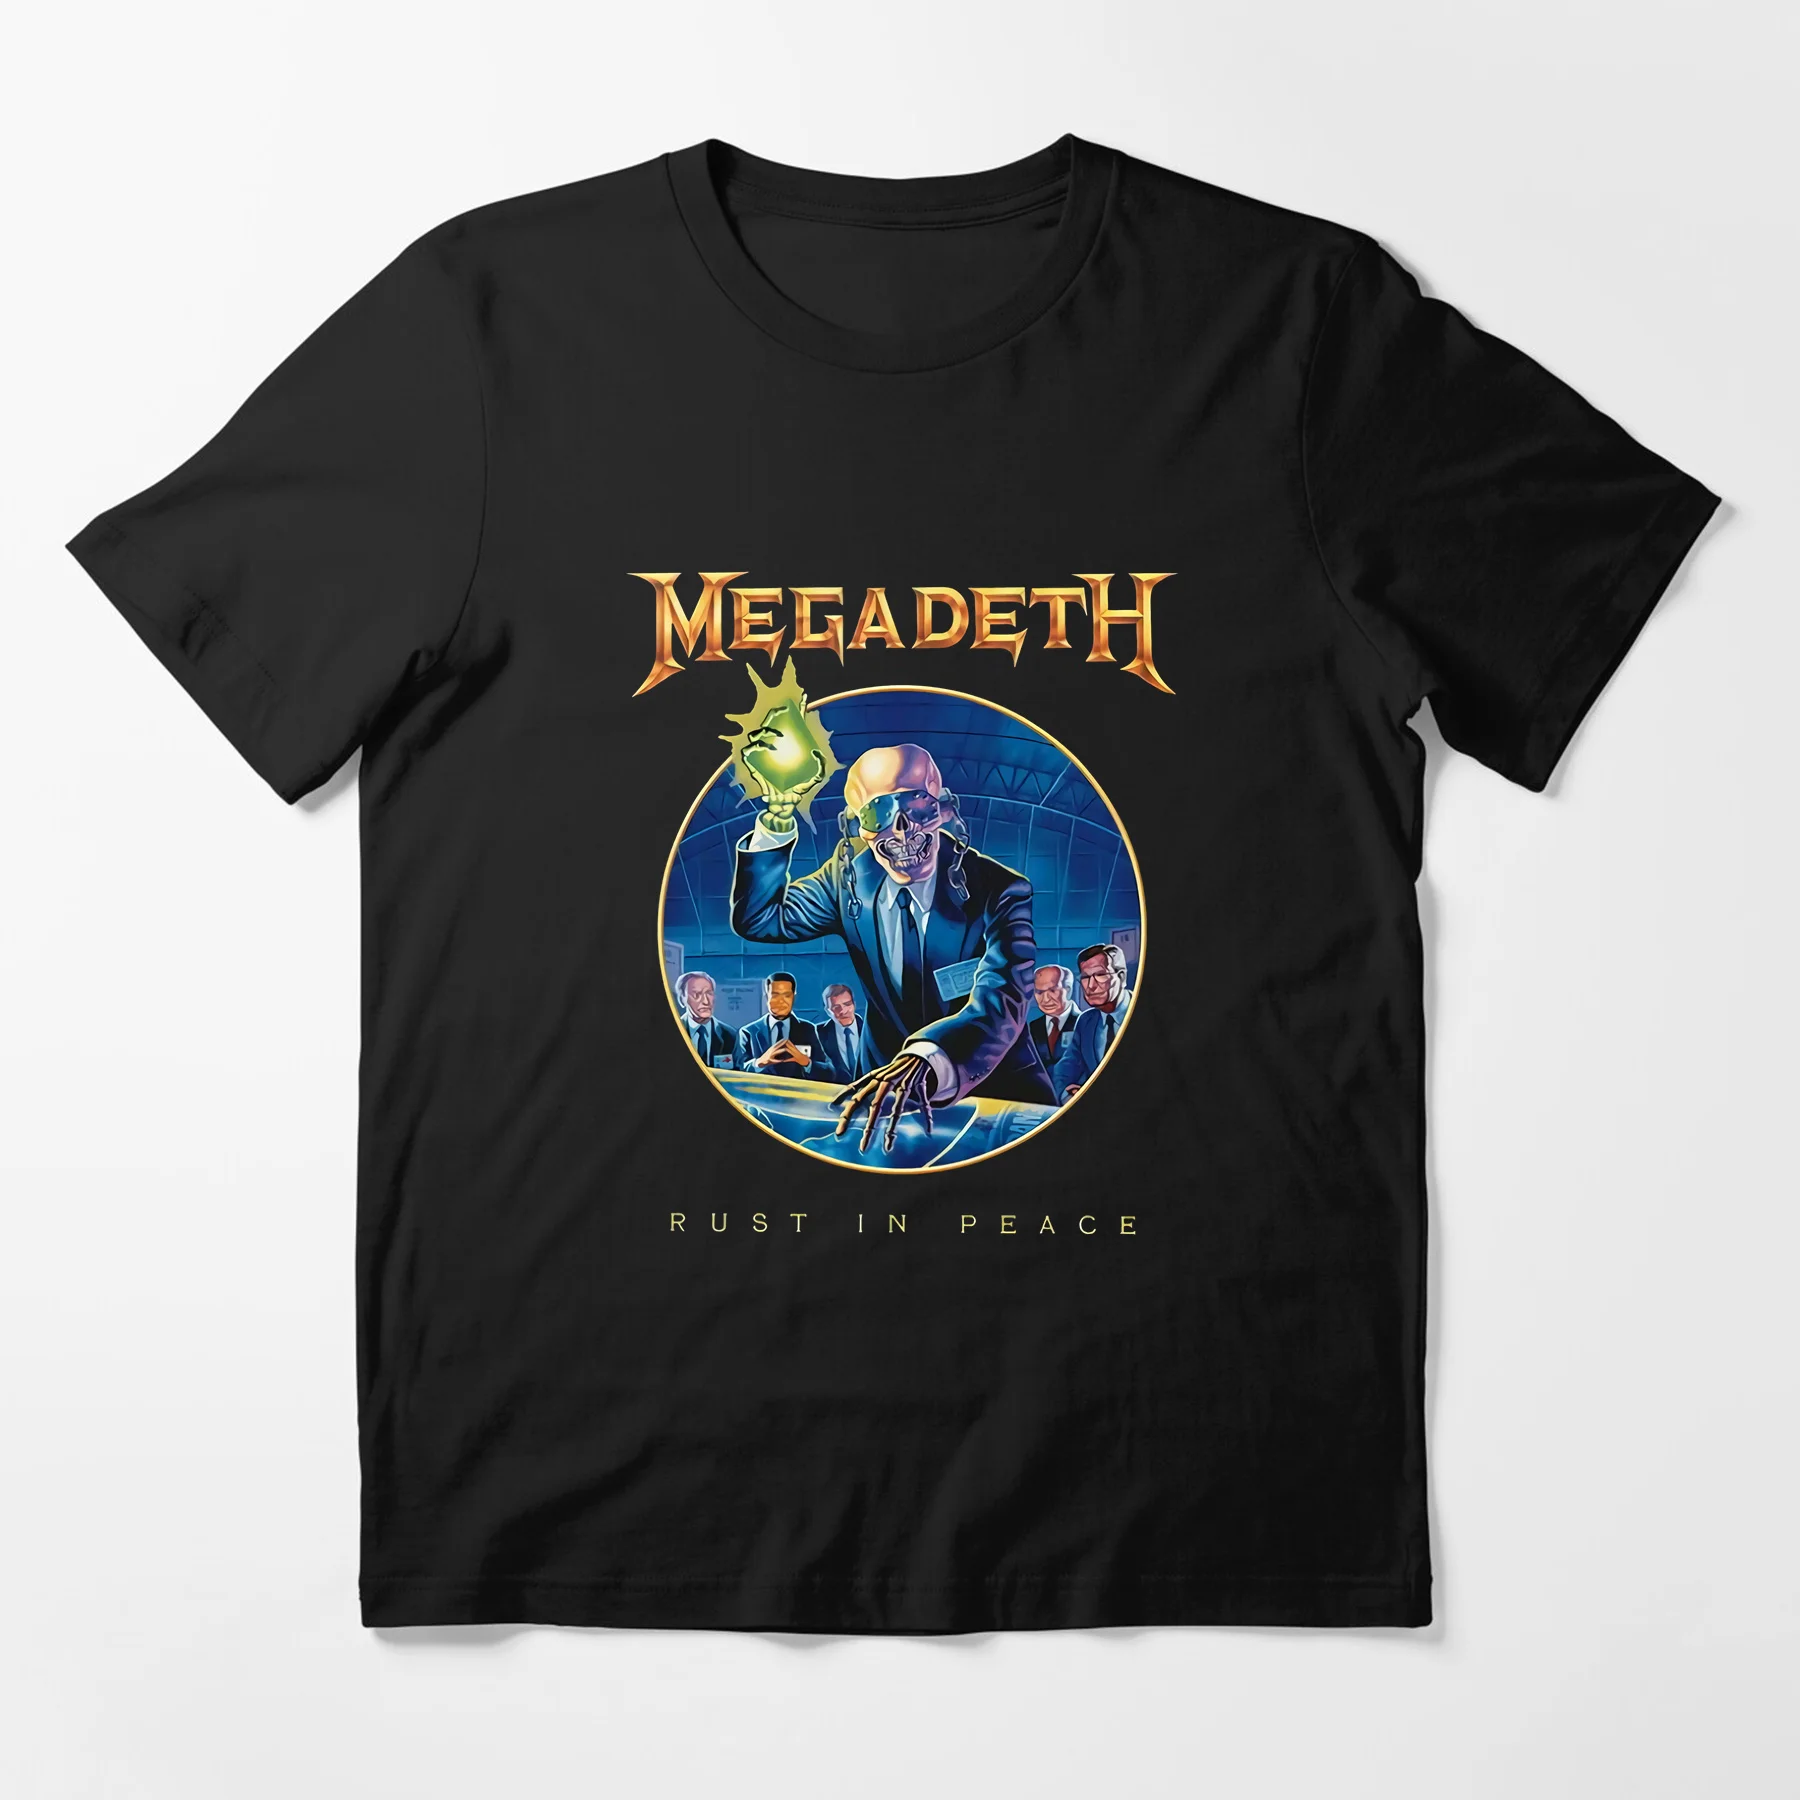 

Amazing Tee Male T Shirt Oversized Megadeths 'Rust In Peace Anniversary' (Black) T-shirt Men T-shirts Graphic Short Sleeve S-3XL